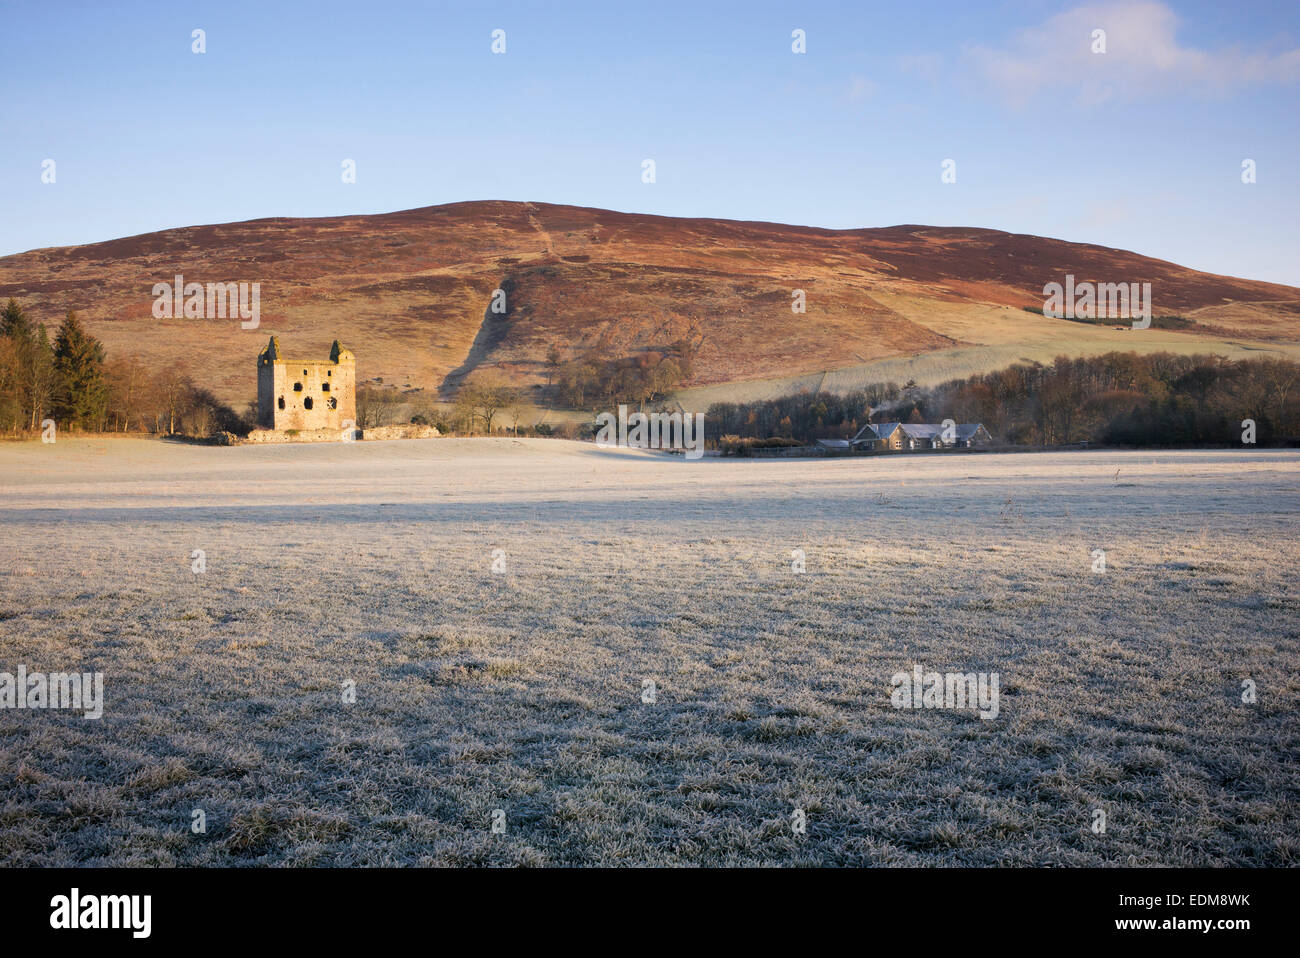 Newark tower in winter. Bowhill House estate, Selkirkshire. Scotland Stock Photo